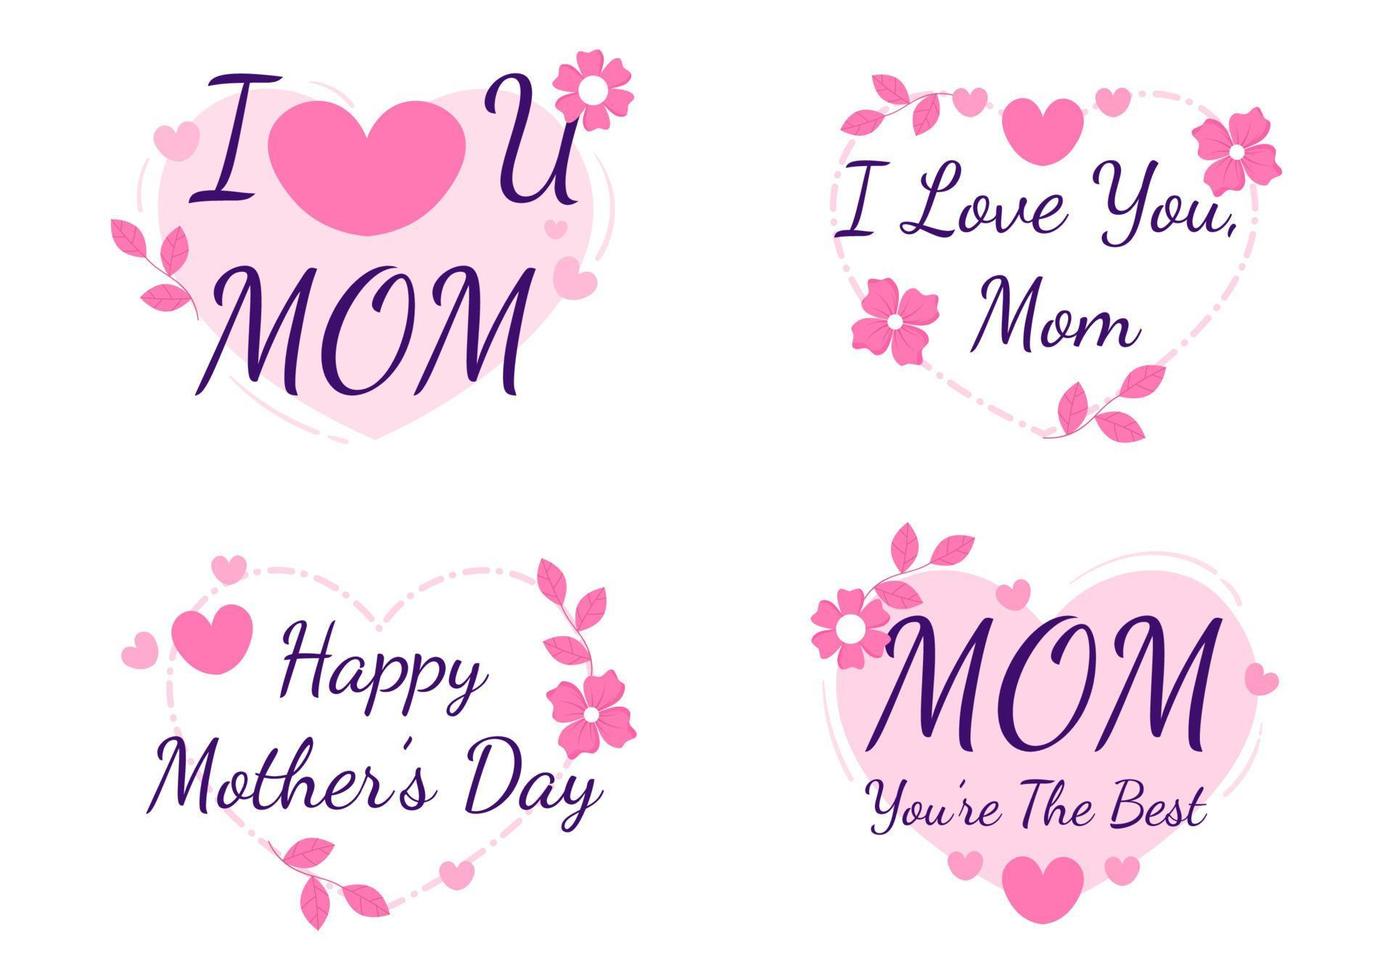 Happy Mother Day with Beautiful Blossom Flowers and Calligraphy Text Which is Commemorated on December 22 for Greeting Card or Poster Flat Design Illustration vector